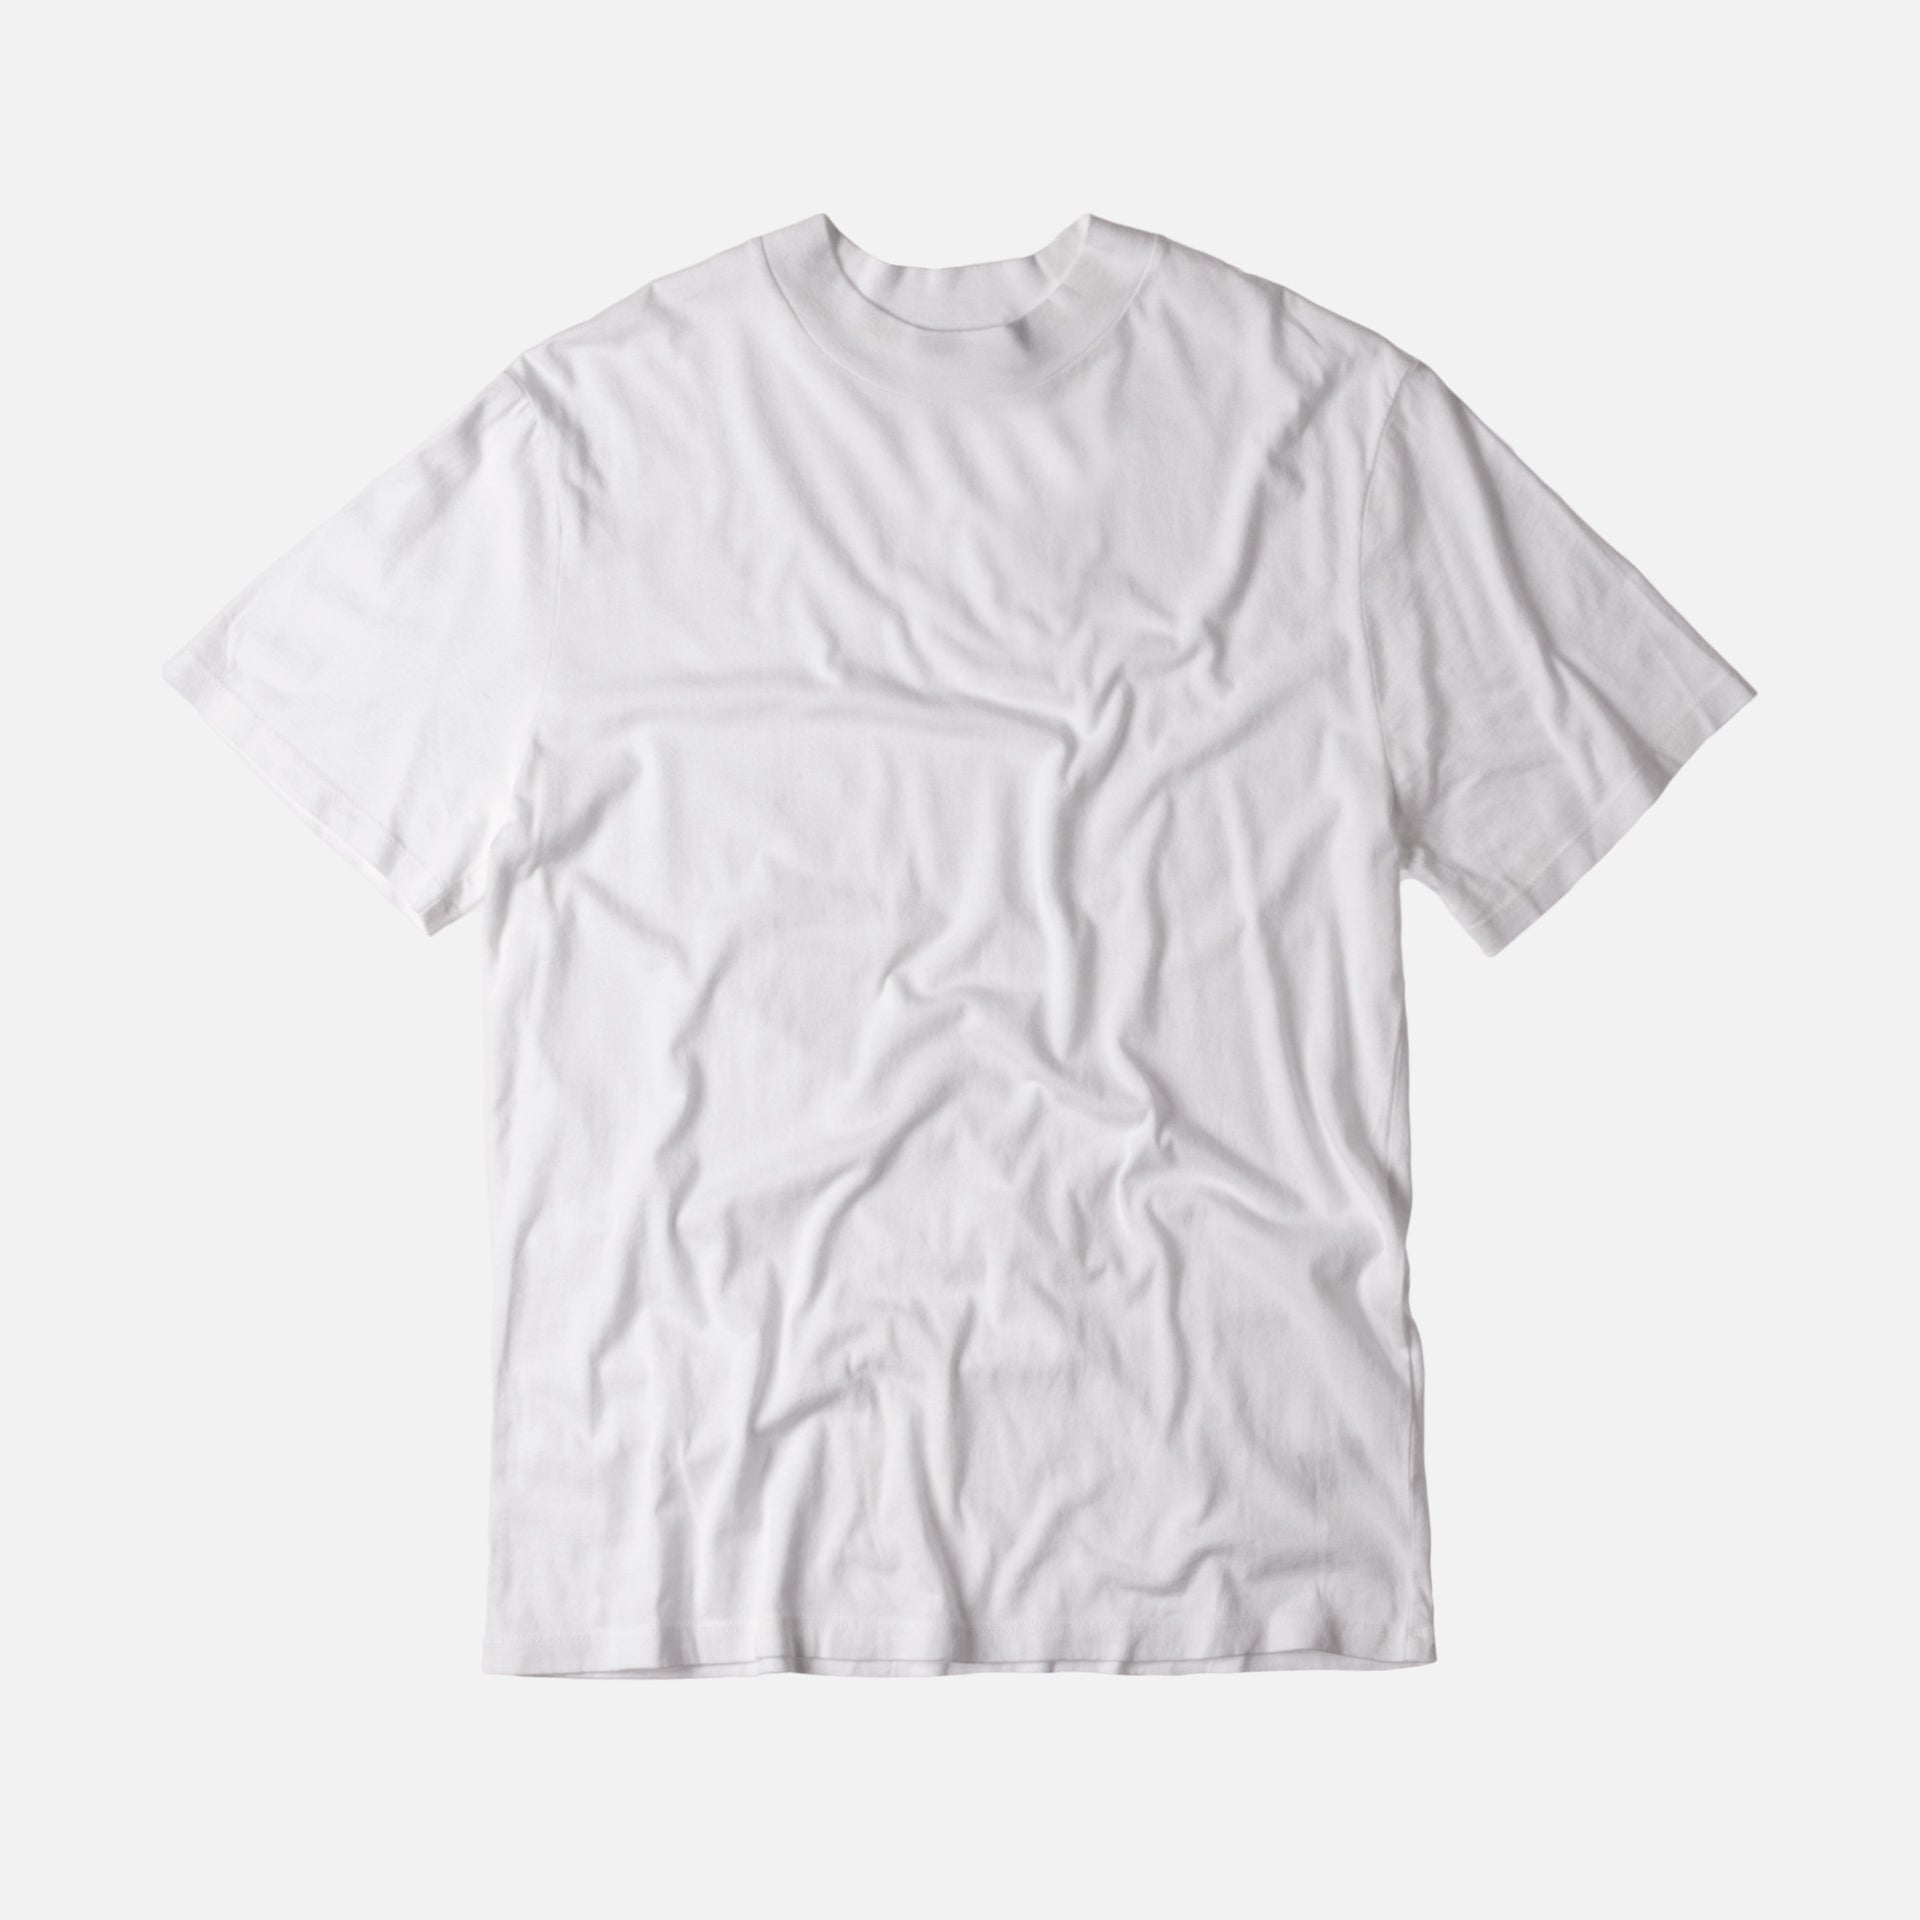 T by Alexander S/S High Crewneck Tee - White